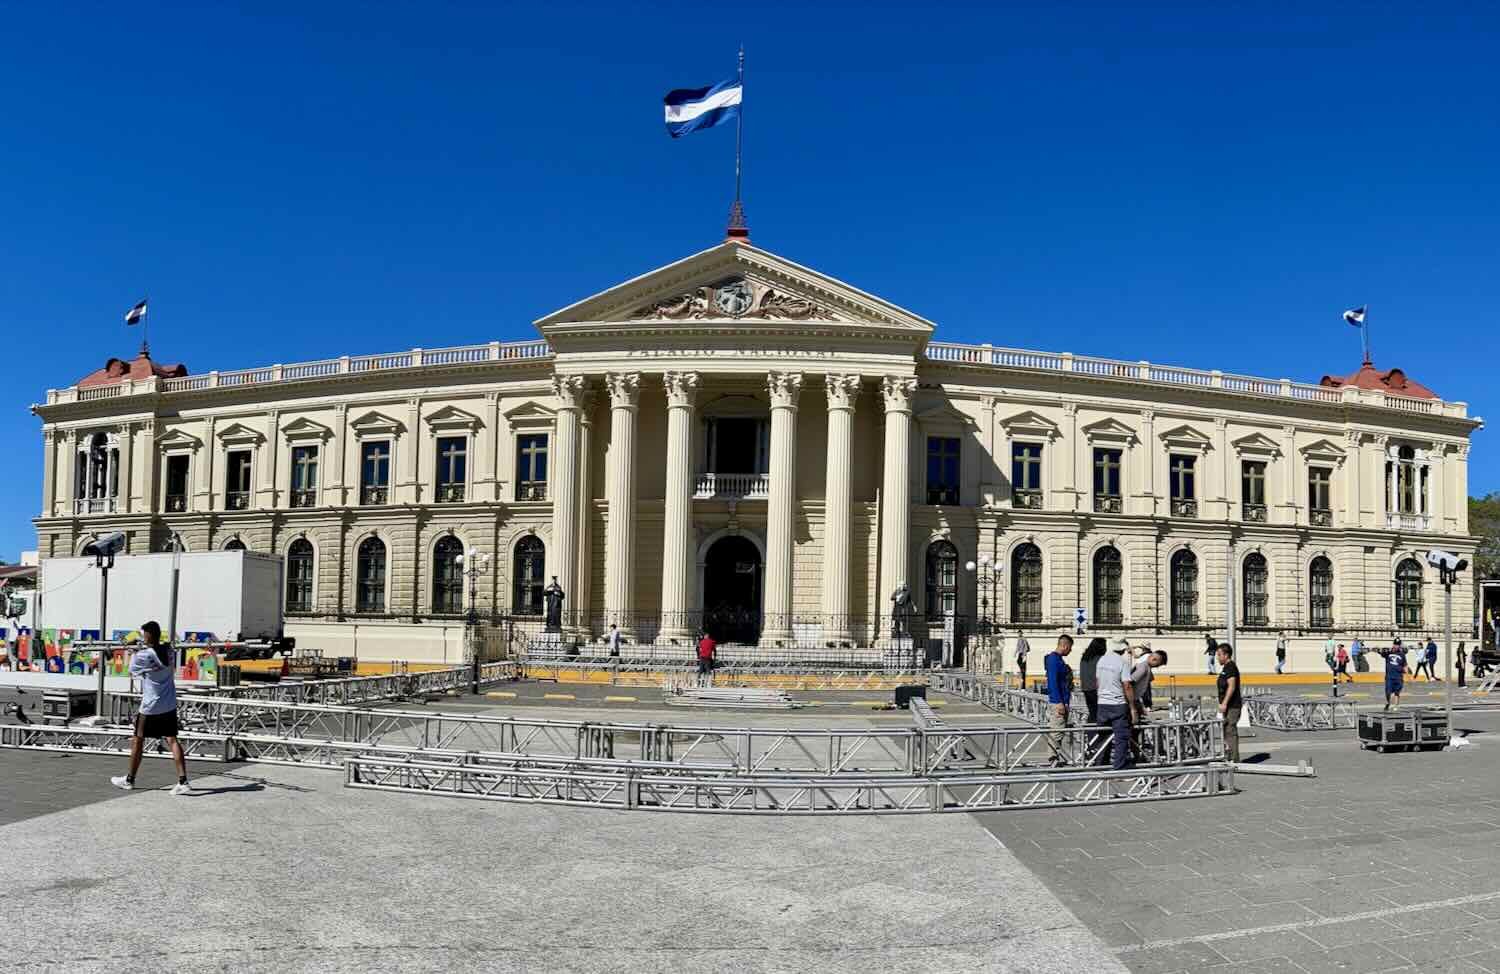 The National Palace dominates one side of the Civic Square in the city's historic center